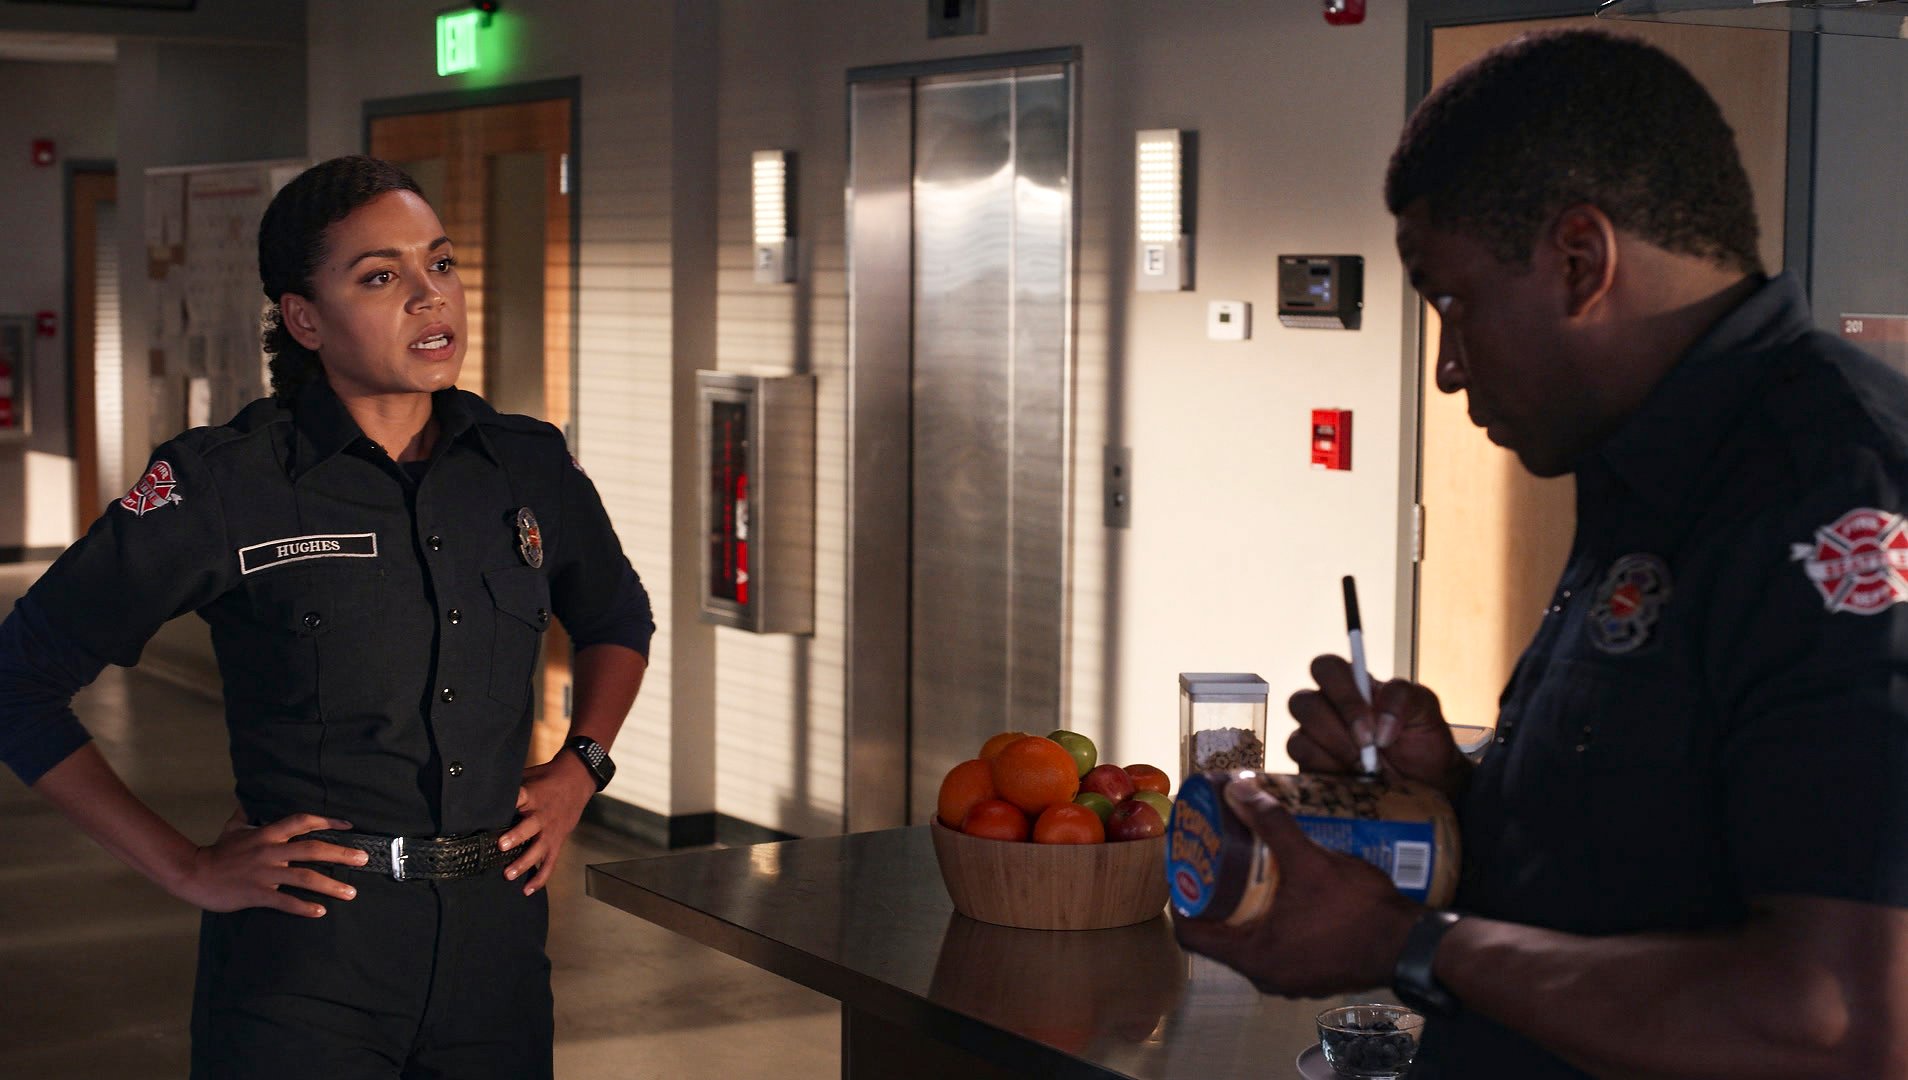 Barrett Doss as Victoria ‘Vic’ Hughes and Okieriete Onaodowan as Dean Miller share a conversation together in ‘Station 19’ Season 5 Episode 5, the ‘Grey’s Anatomy’ Season 18 crossover